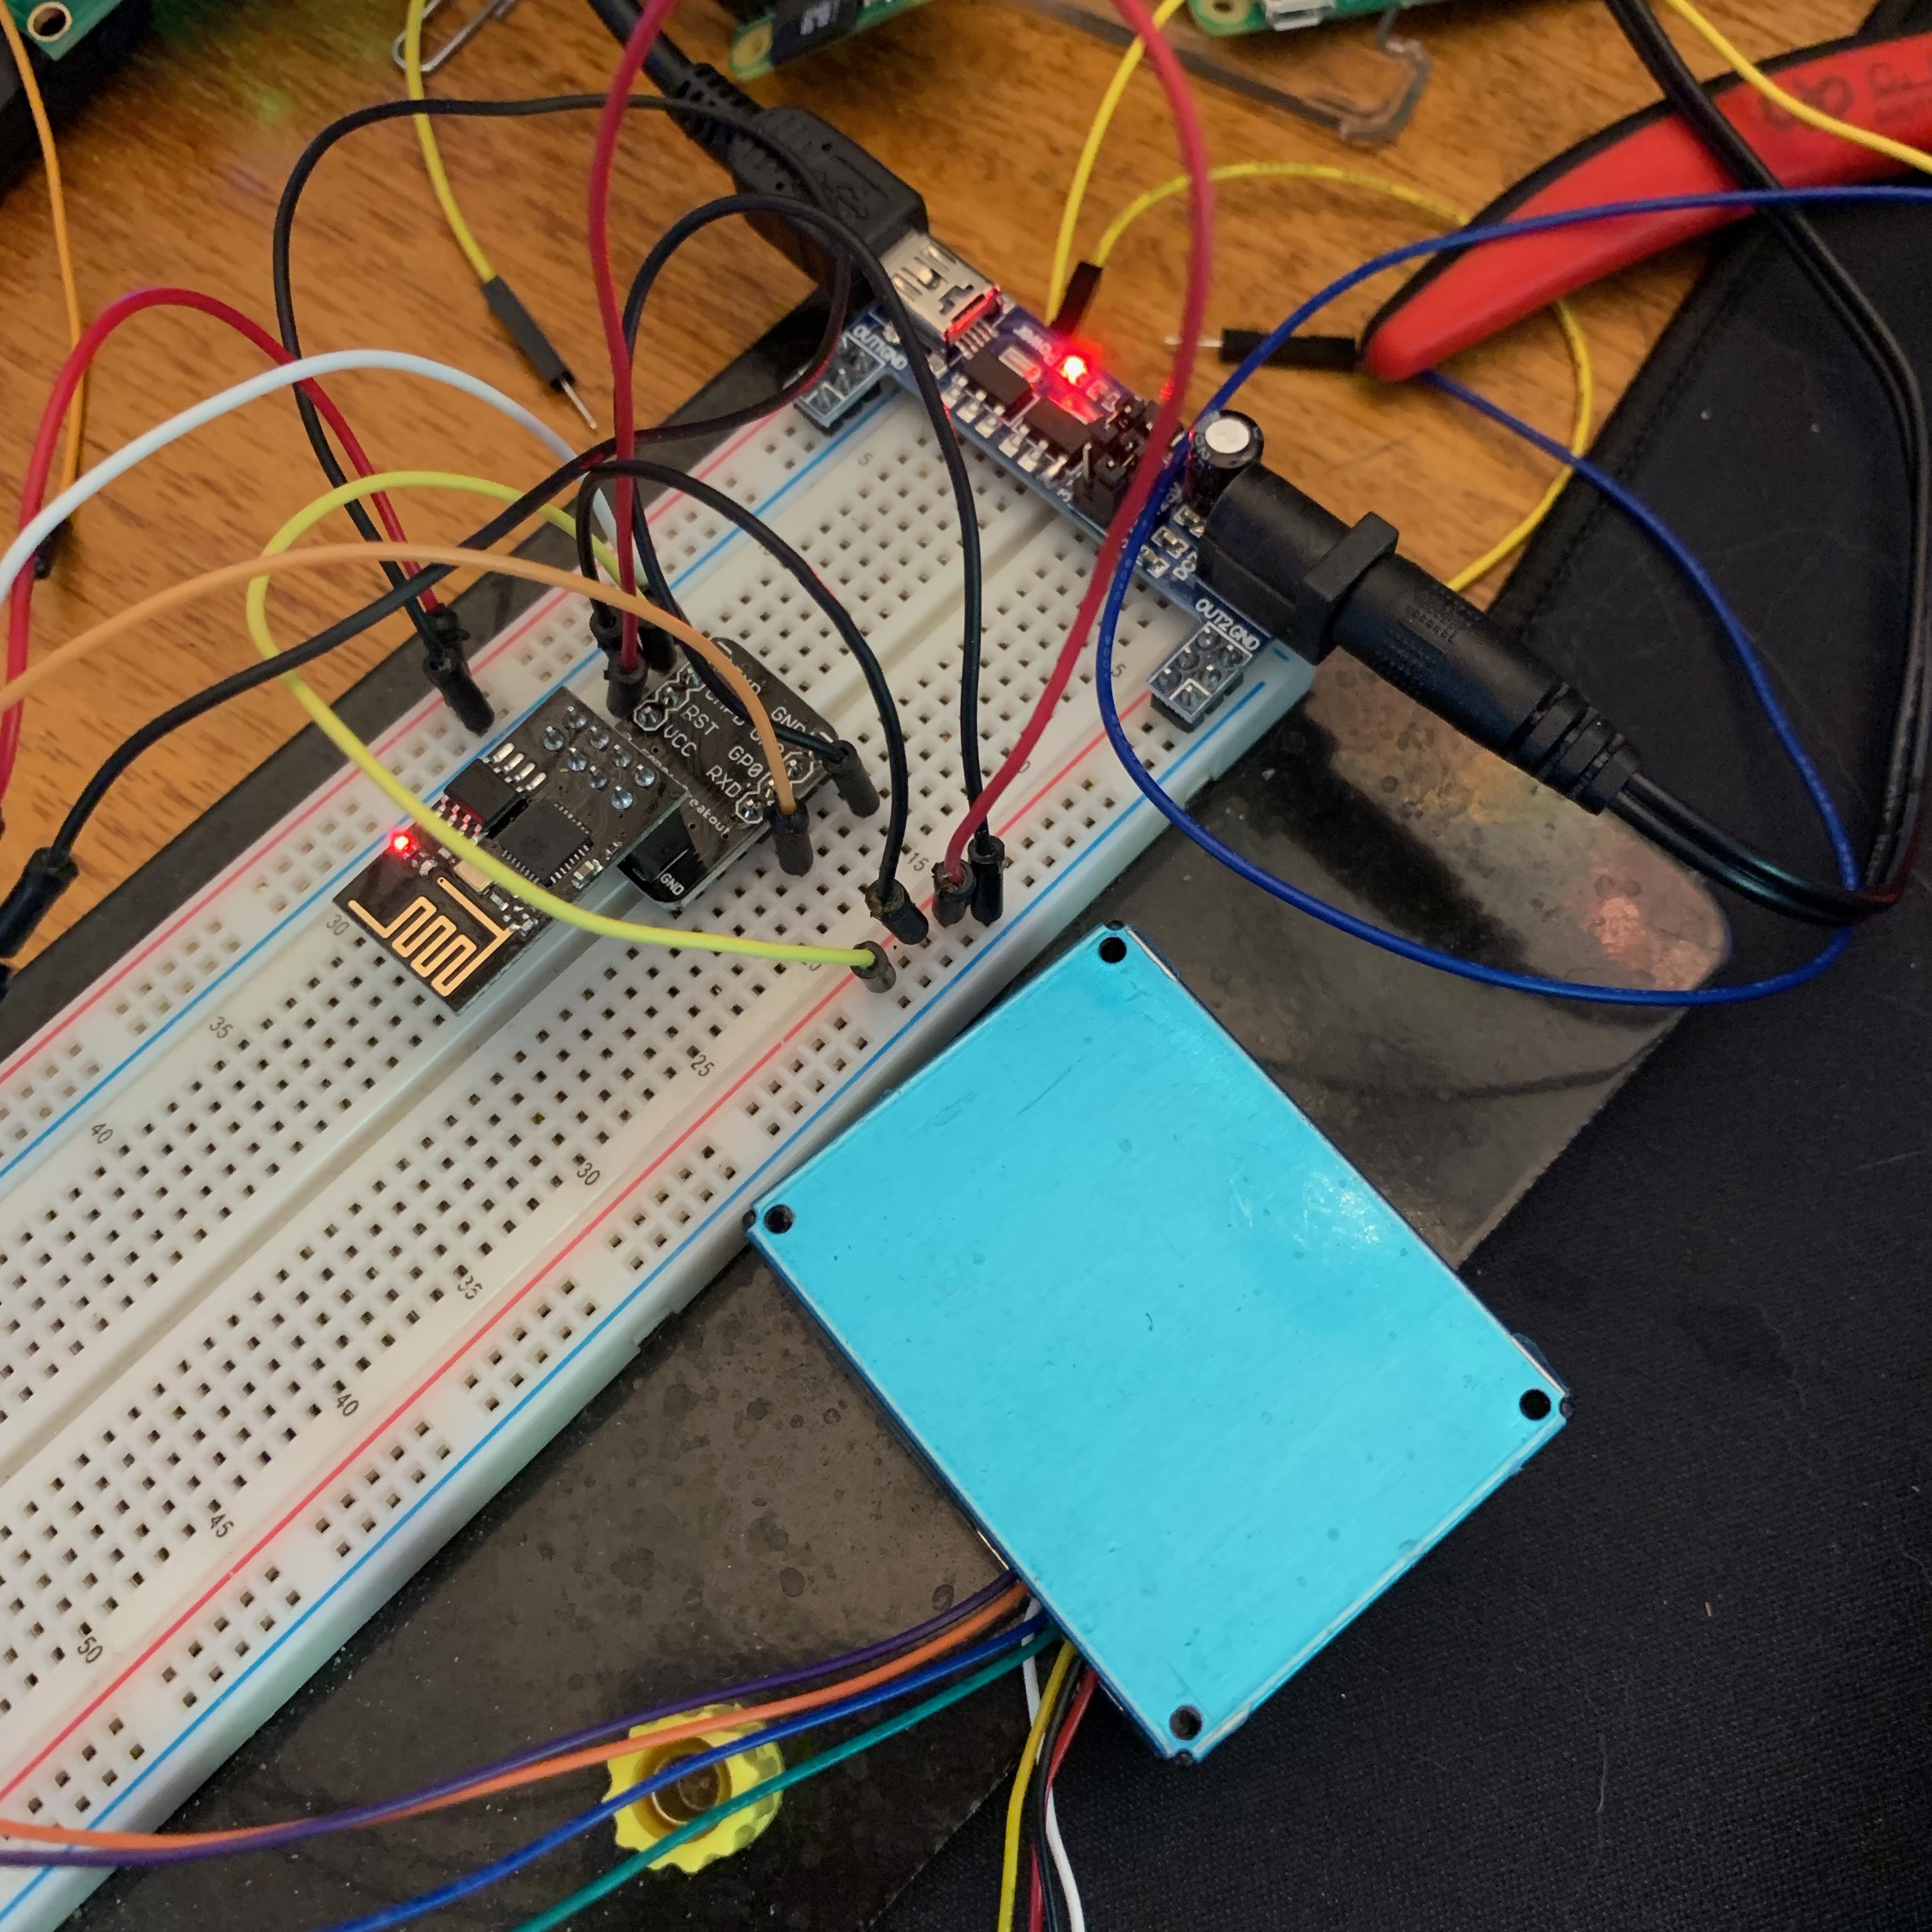 ESP8266 and Plantower on a Breadboard